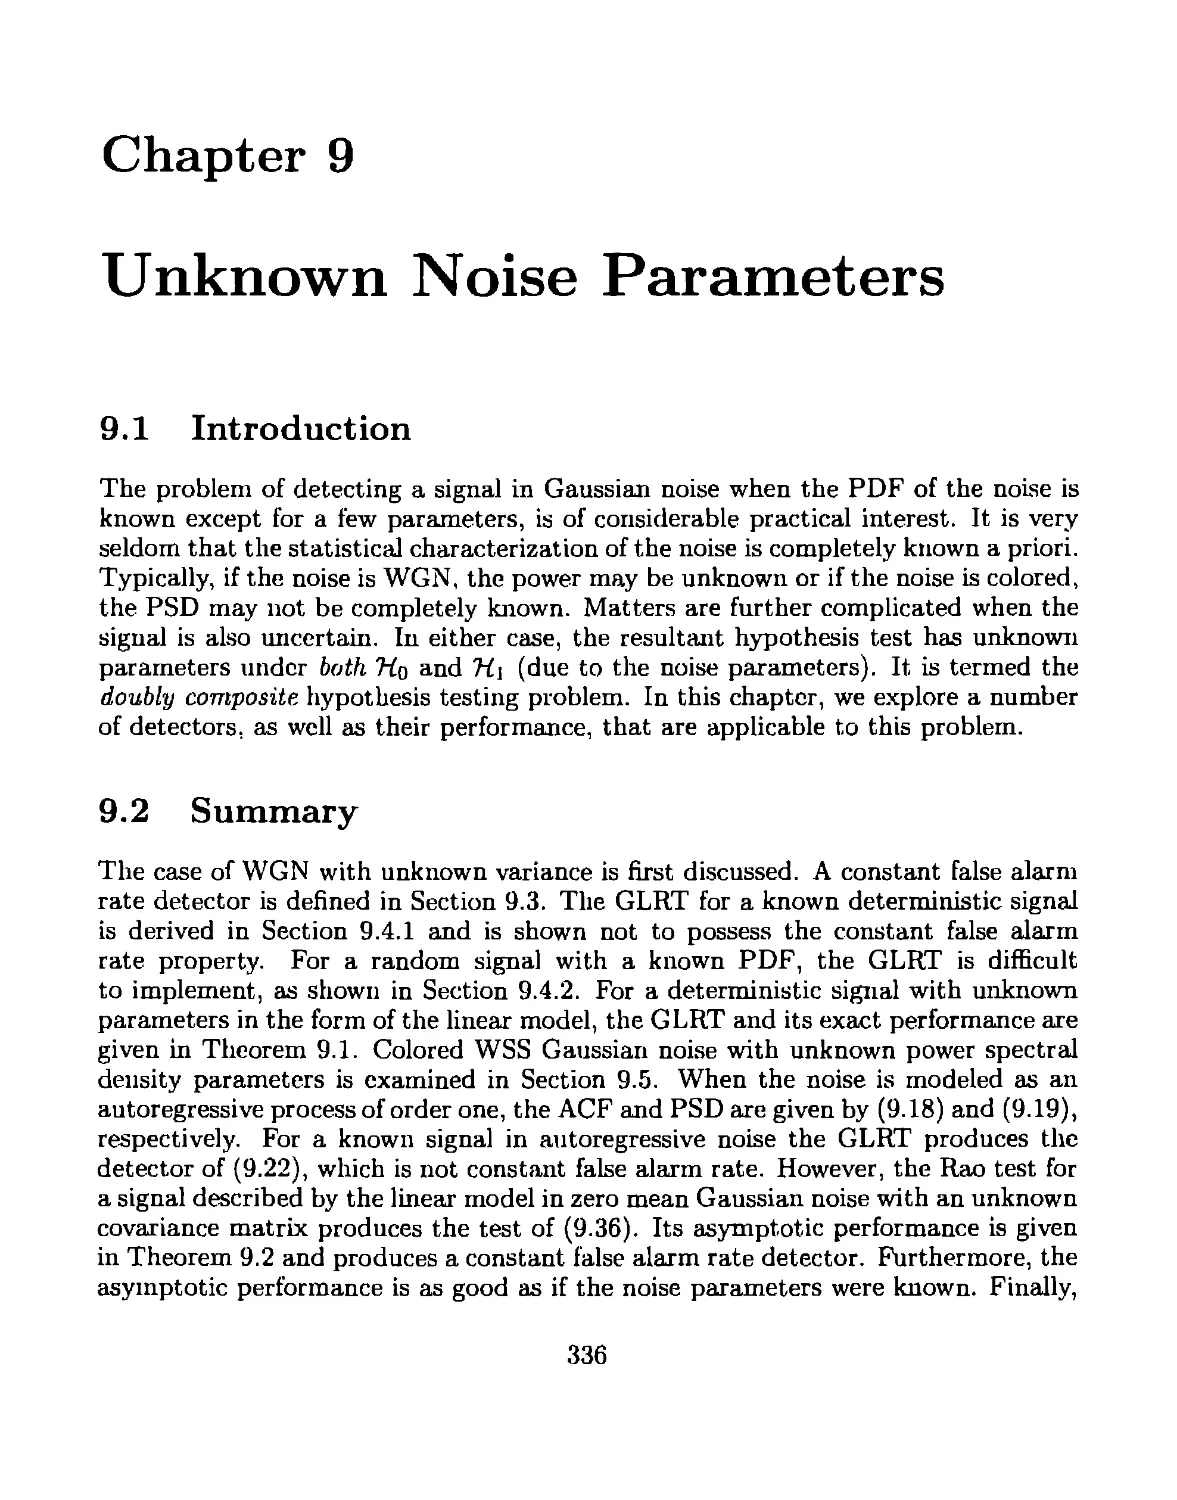 9 Unknown Noise Parameters
9.2 Summary